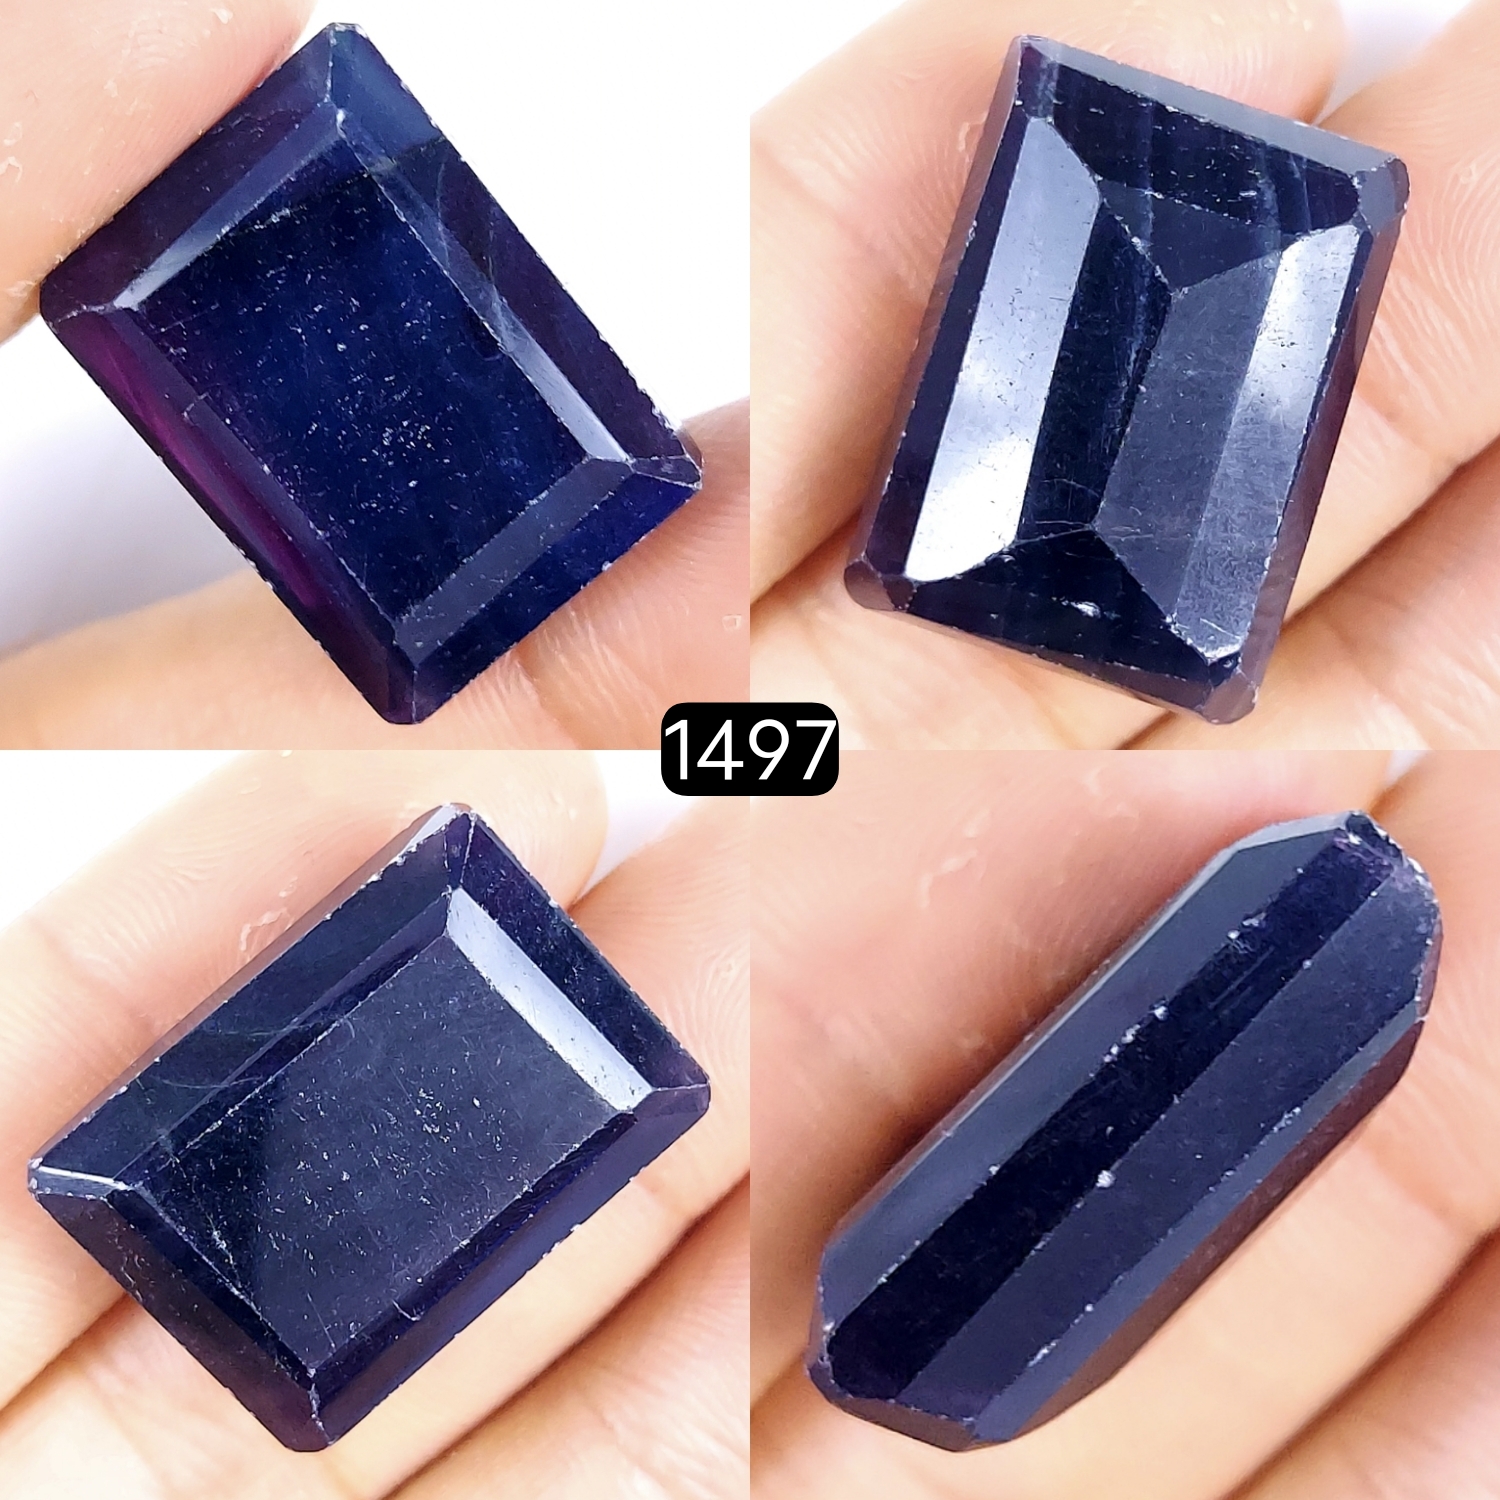 1Pcs 64Cts Natural Multi Flourite Faceted Rectangle Loose Gemstone27x19mm#1497